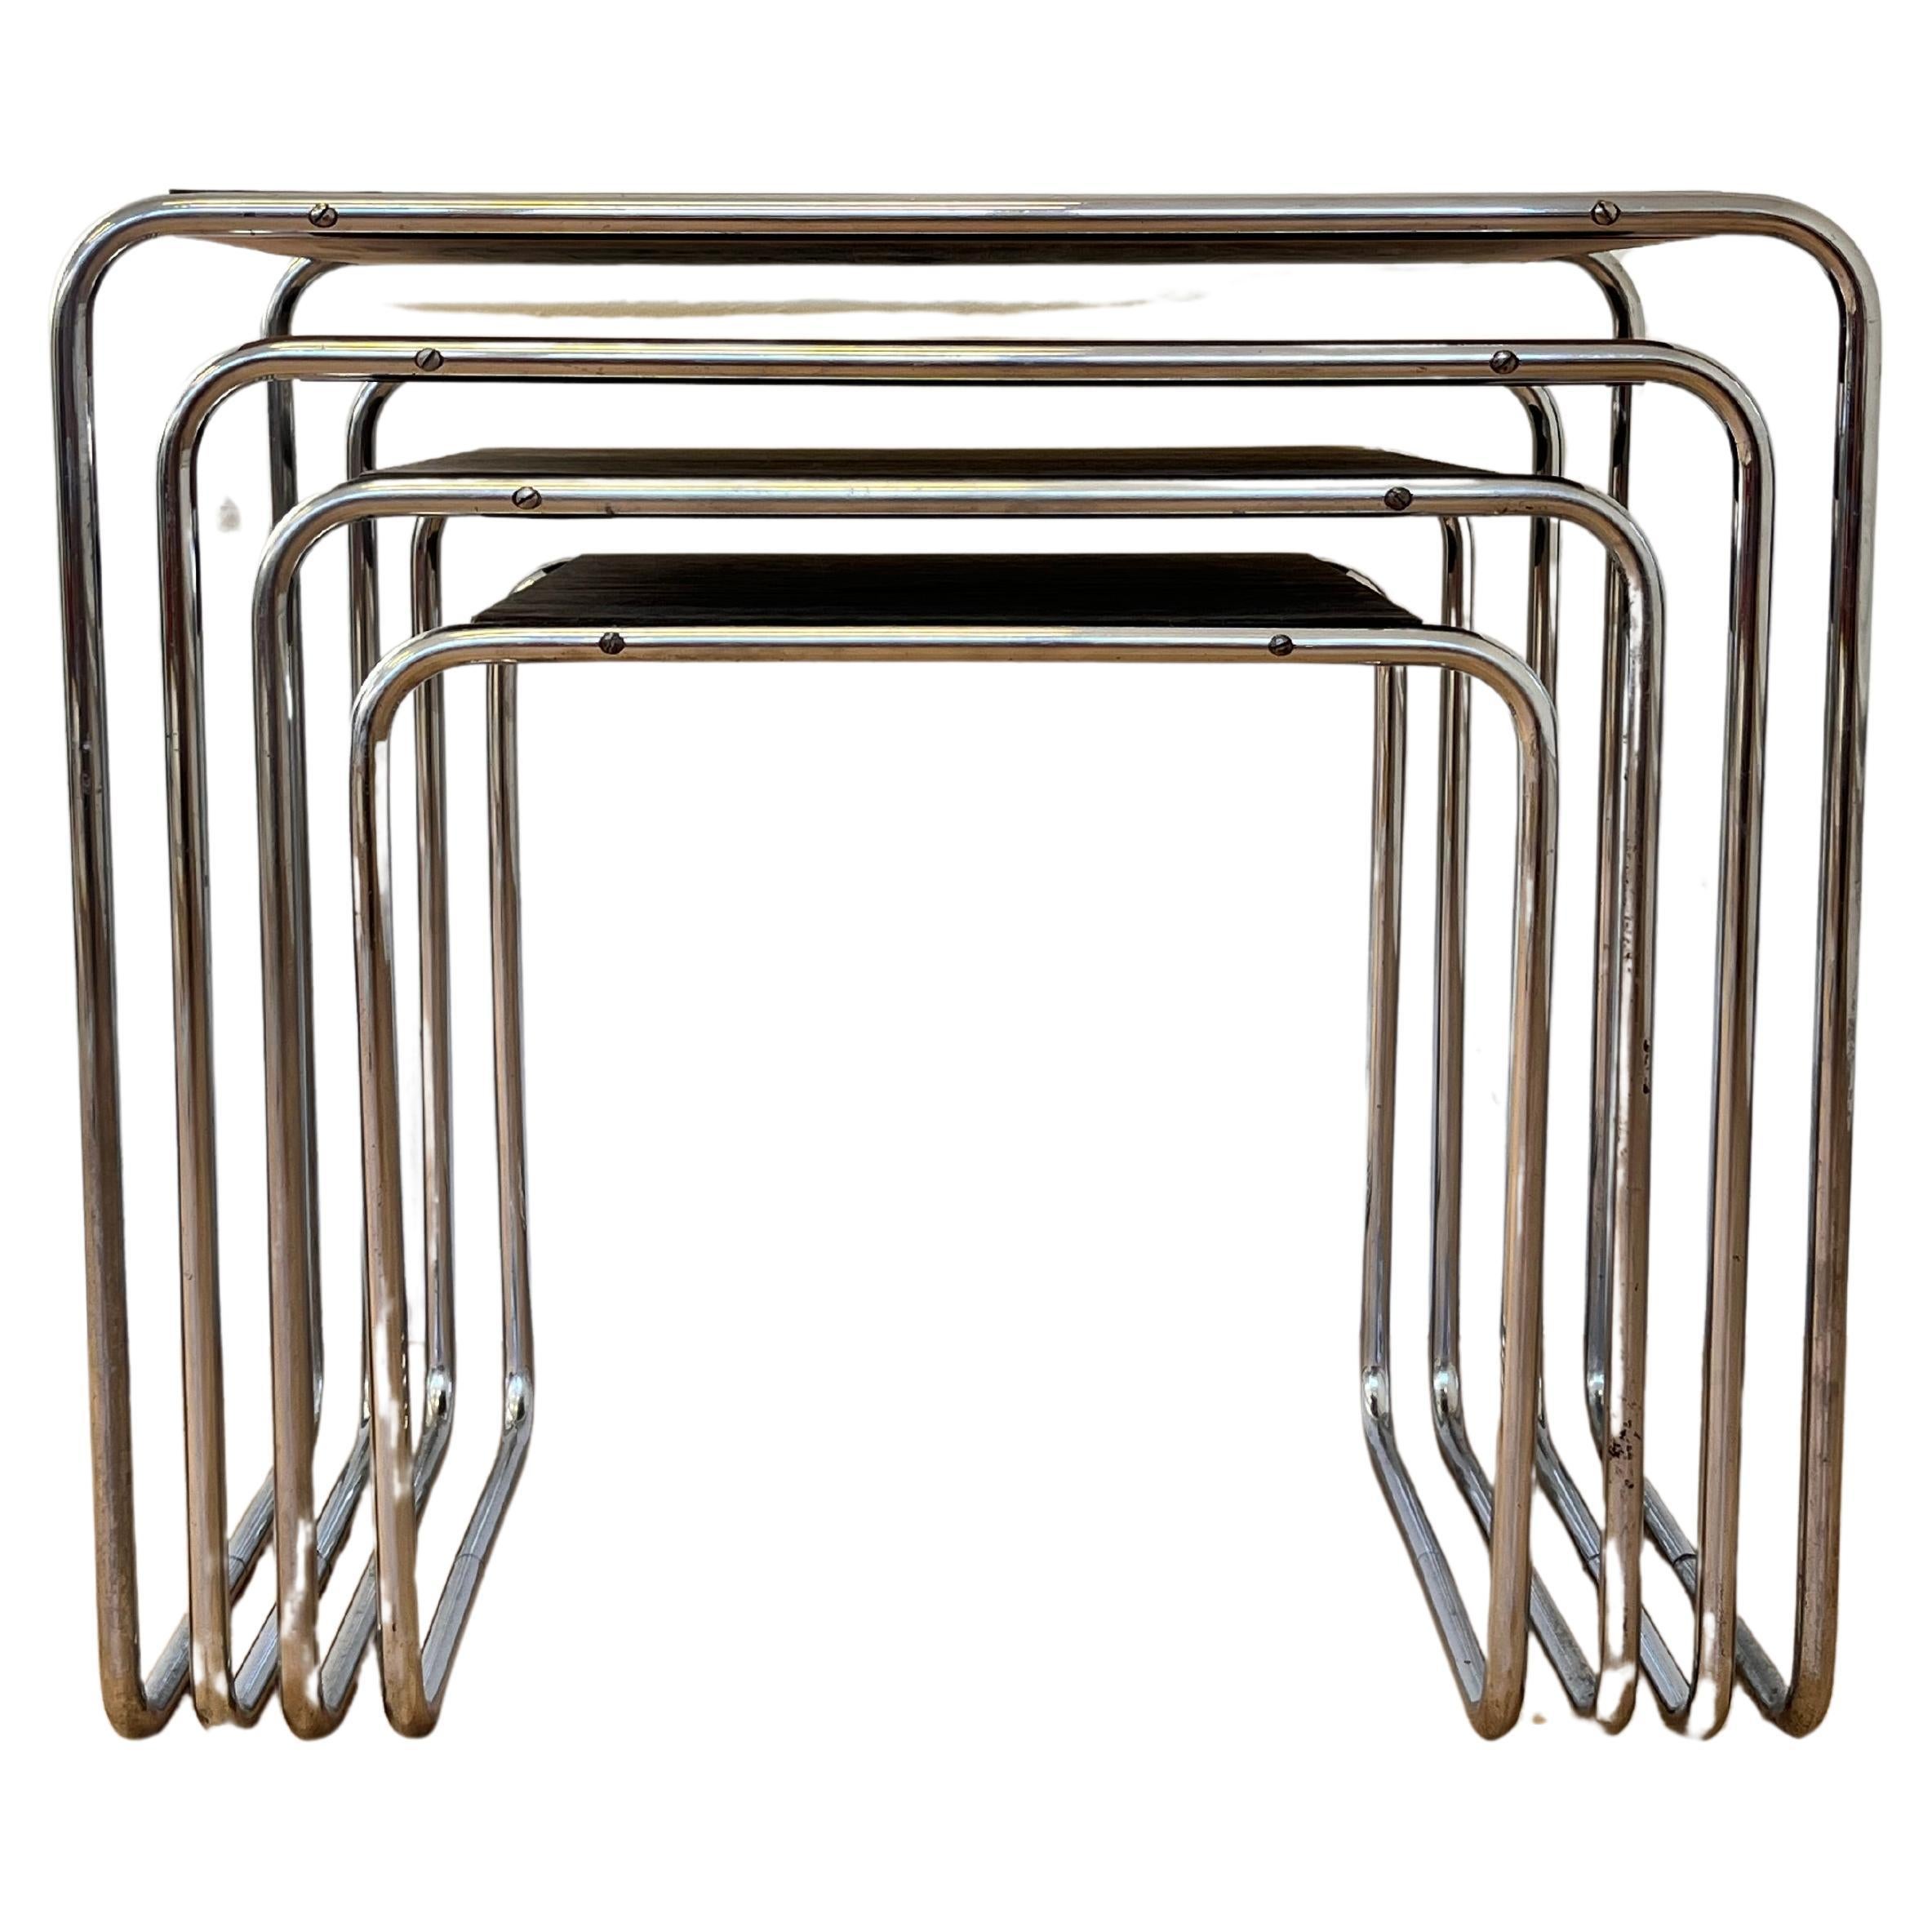 Mücke & Melder Nesting Tables and Stacking Tables